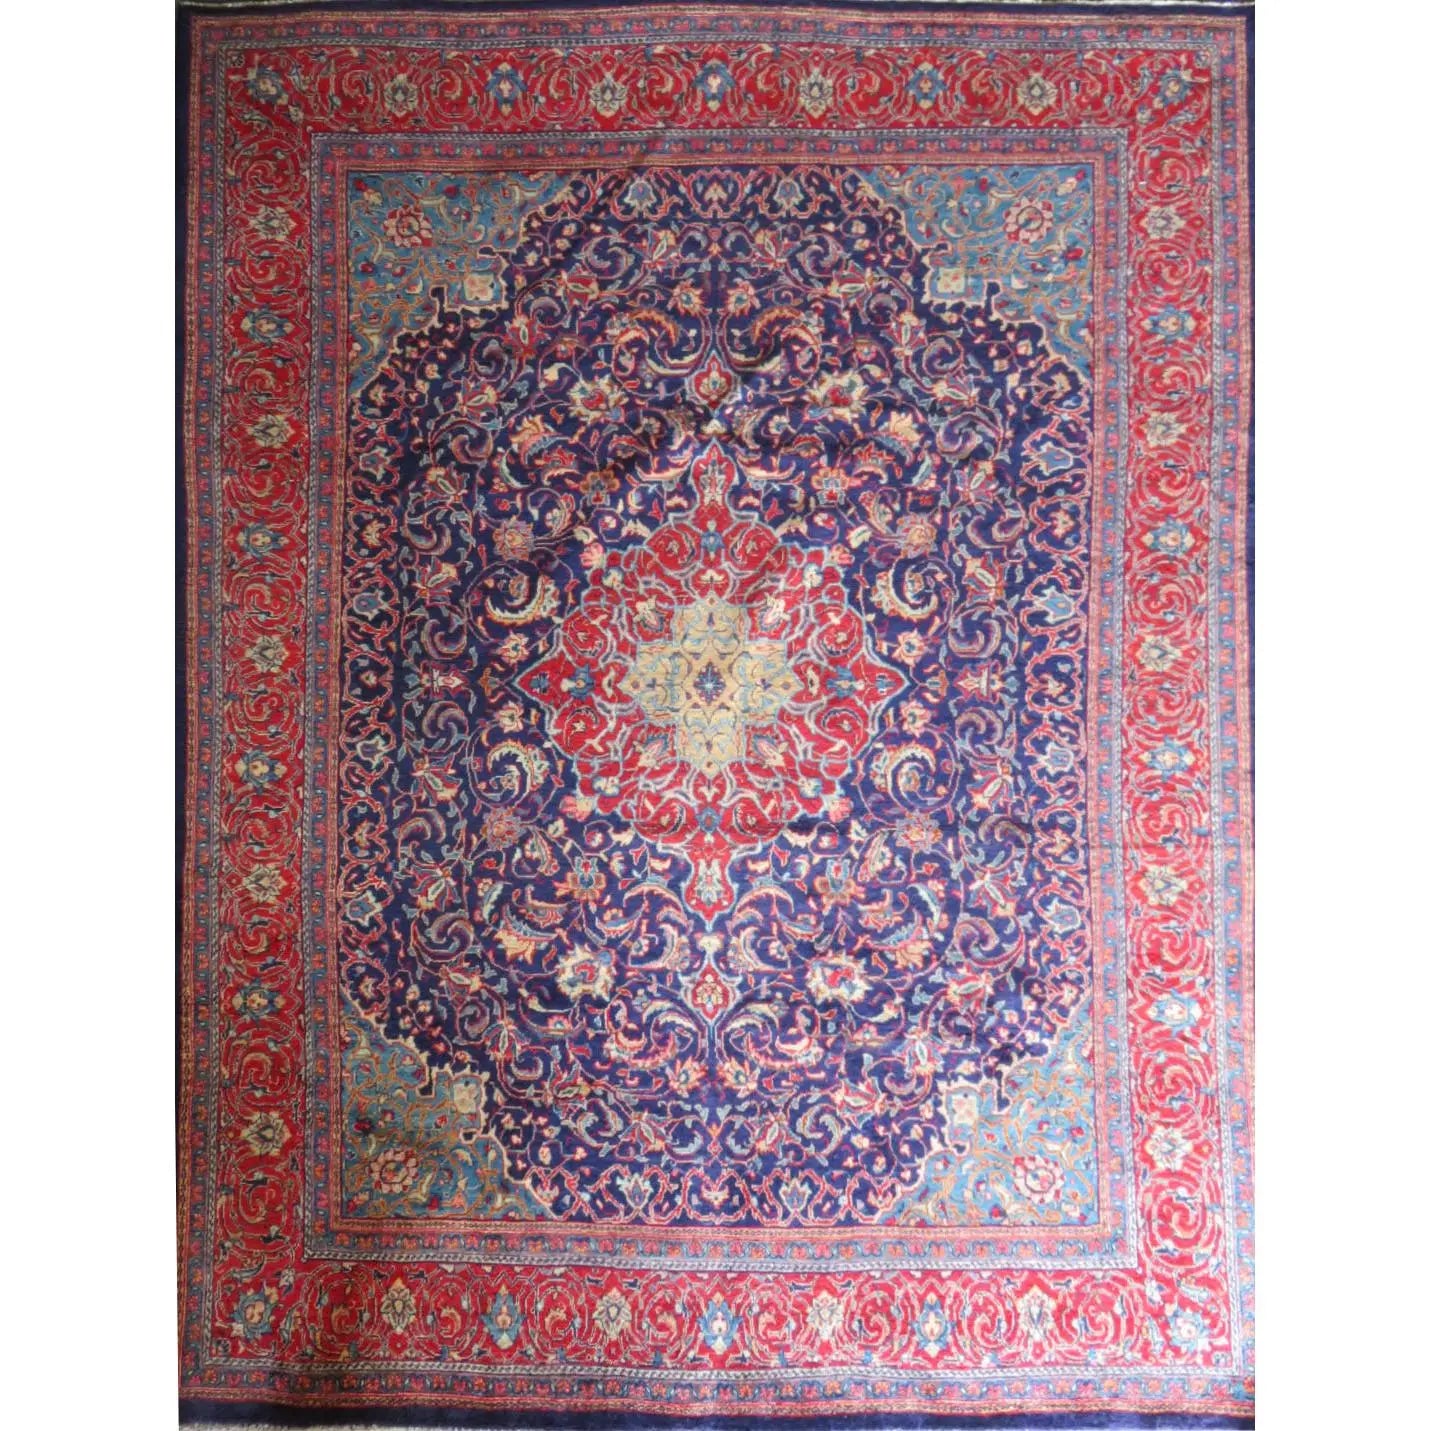 Hand-Knotted Persian Wool Rug _ Luxurious Vintage Design, 12'10" x 9'8", Artisan Crafted